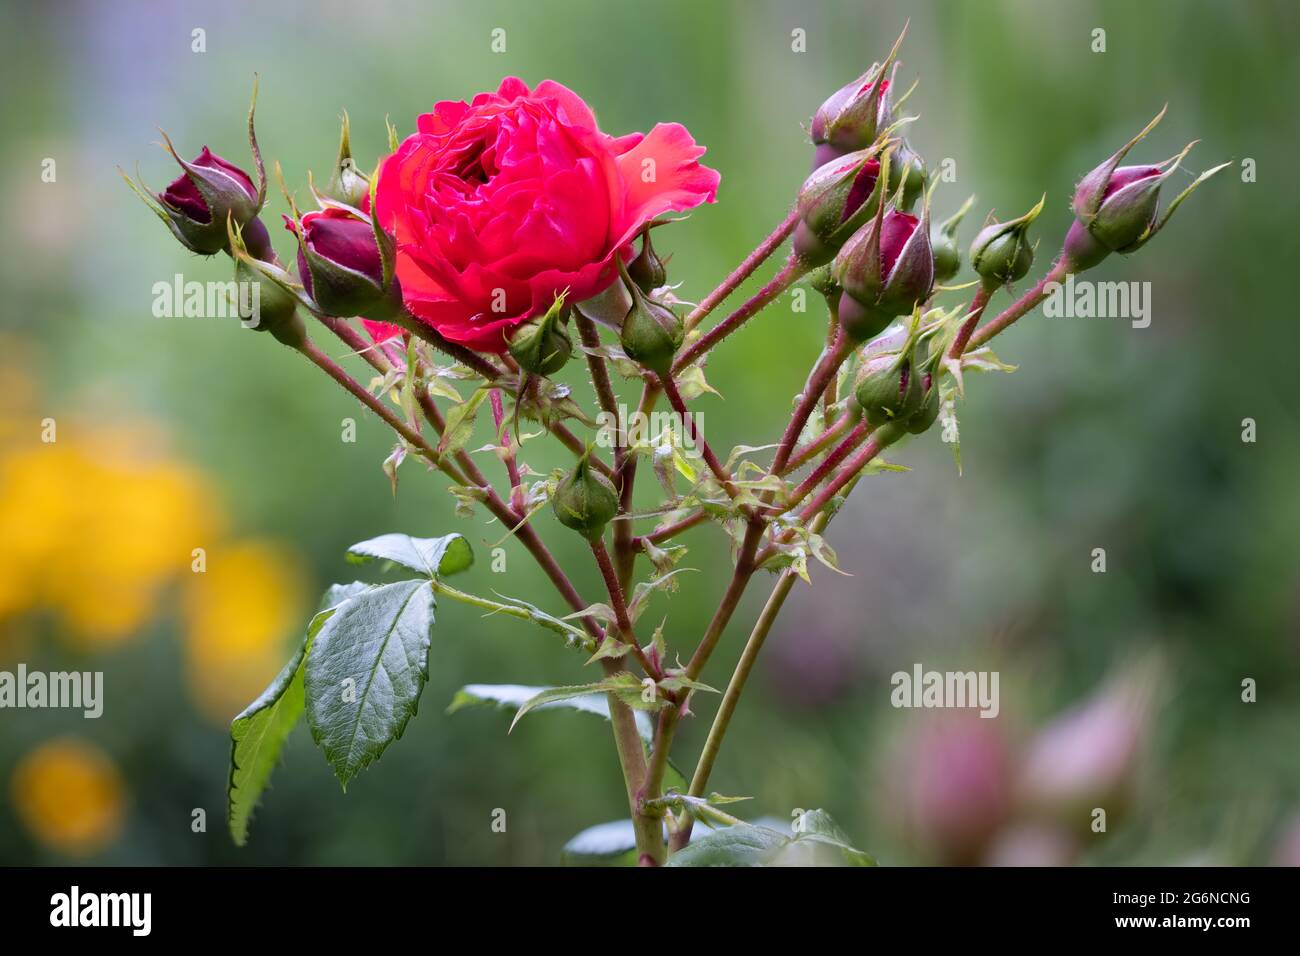 Focus stack detail of red rose flower with blurred background Stock Photo